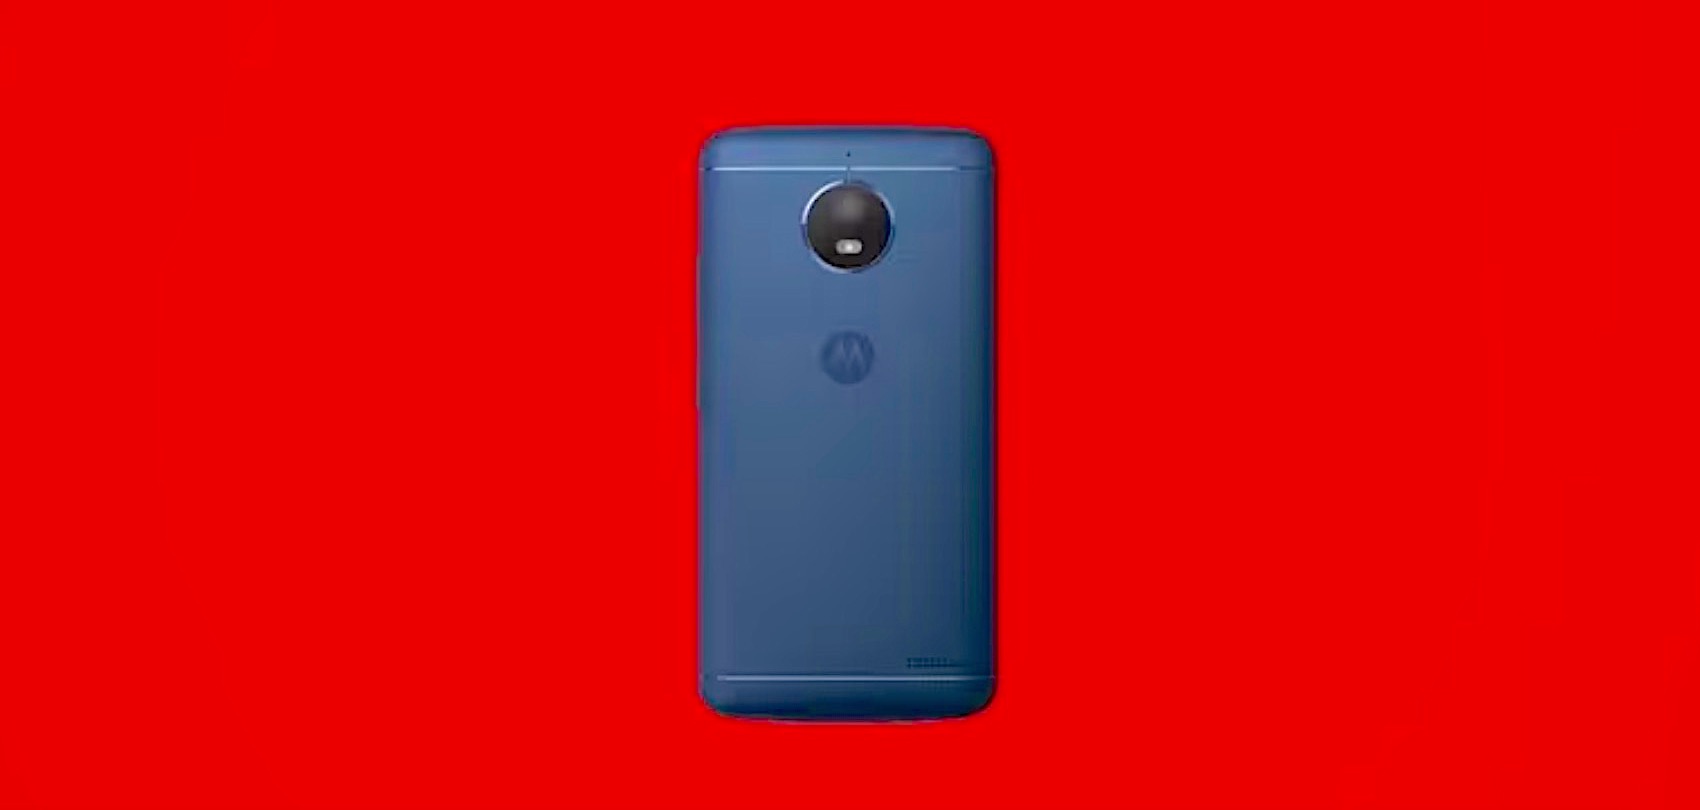 Chaina Rap Xx Video - Motorola accidentally showed the Moto X (2017) in their new rap video, did  you spot it? â€“ Phandroid